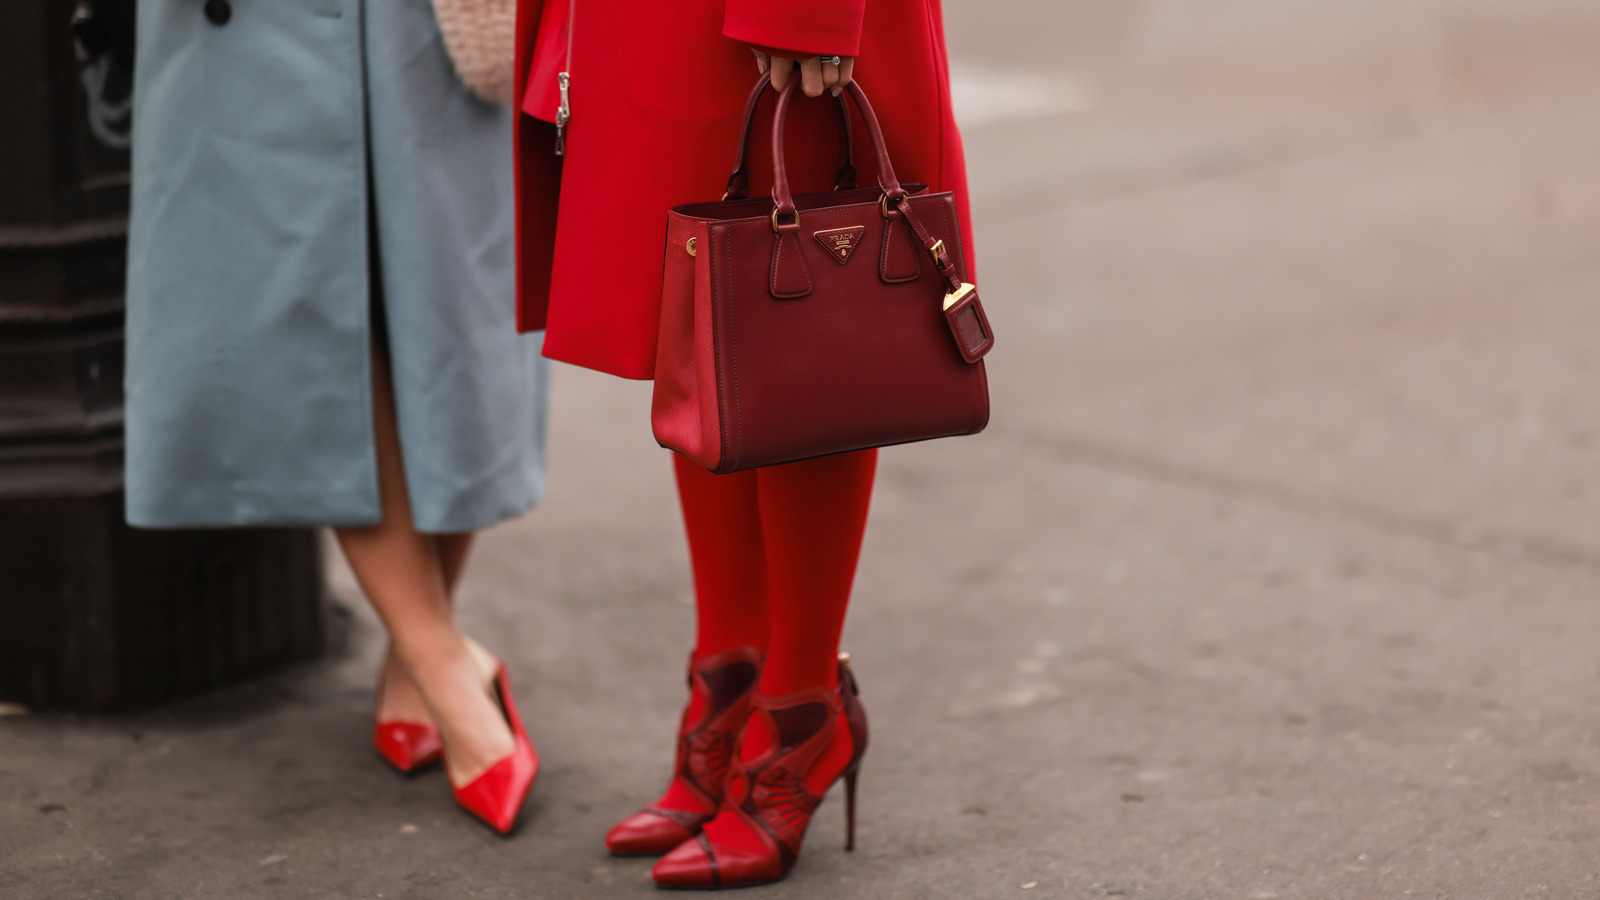 https://www.women.com/img/gallery/red-accessories-are-the-most-versatile-fall-2023-trend-how-to-style-them/l-intro-1695016661.jpg